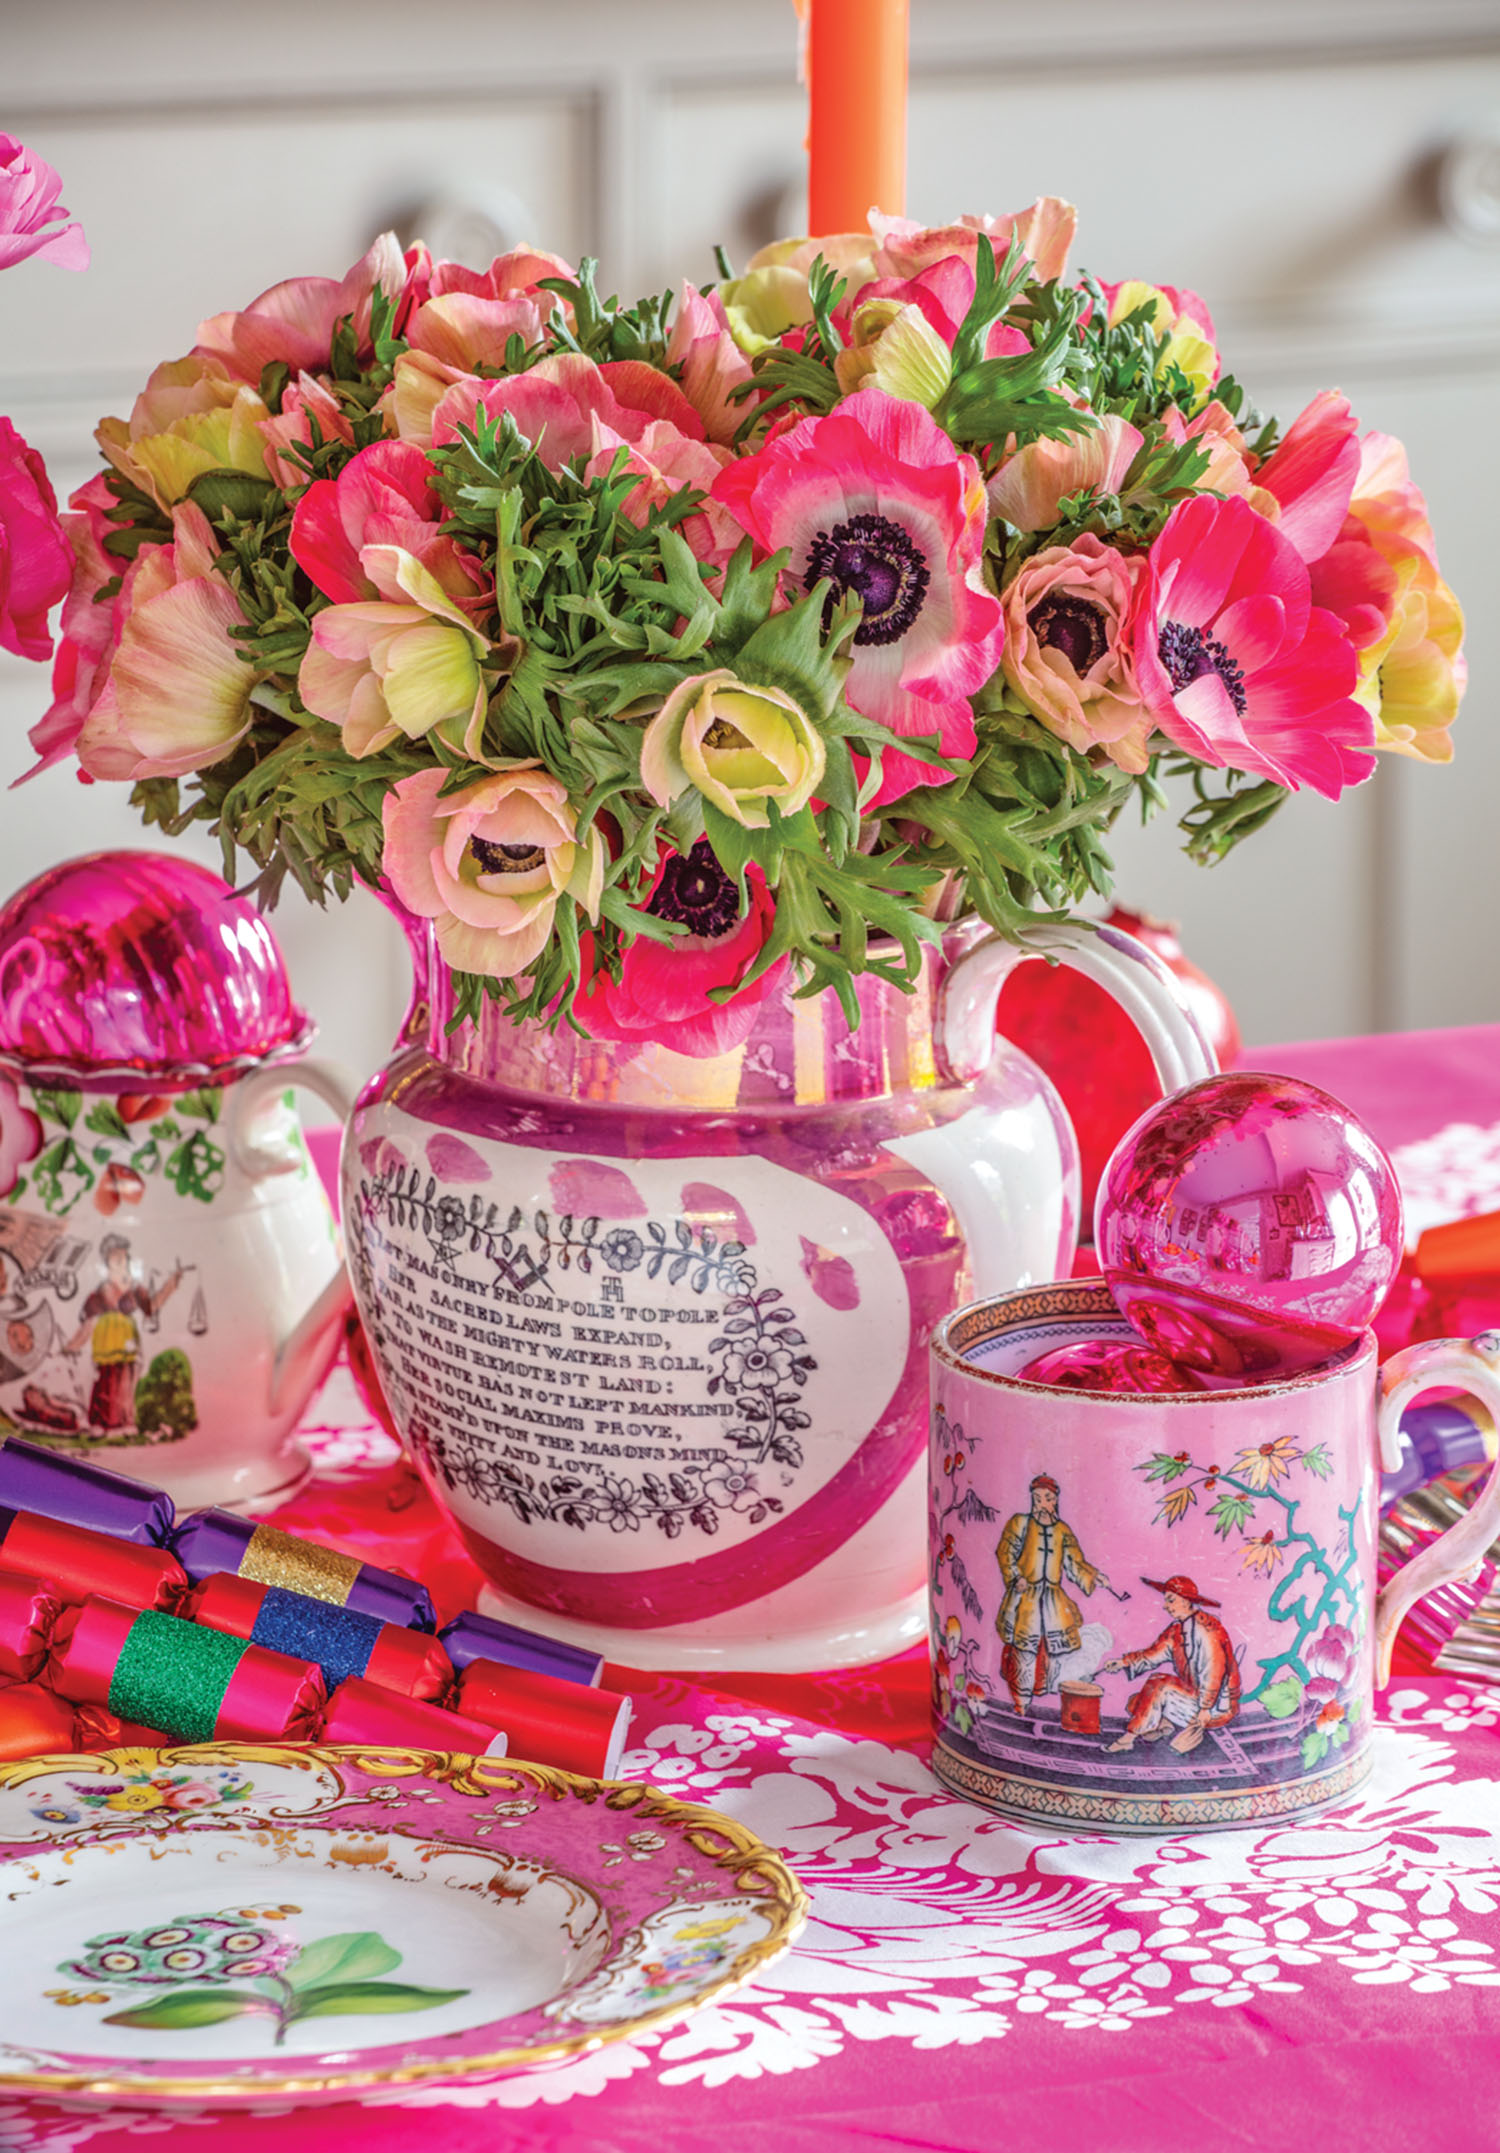 Butter Wakefield fills her beloved lusterware with pink anemones for a Christmas celebration